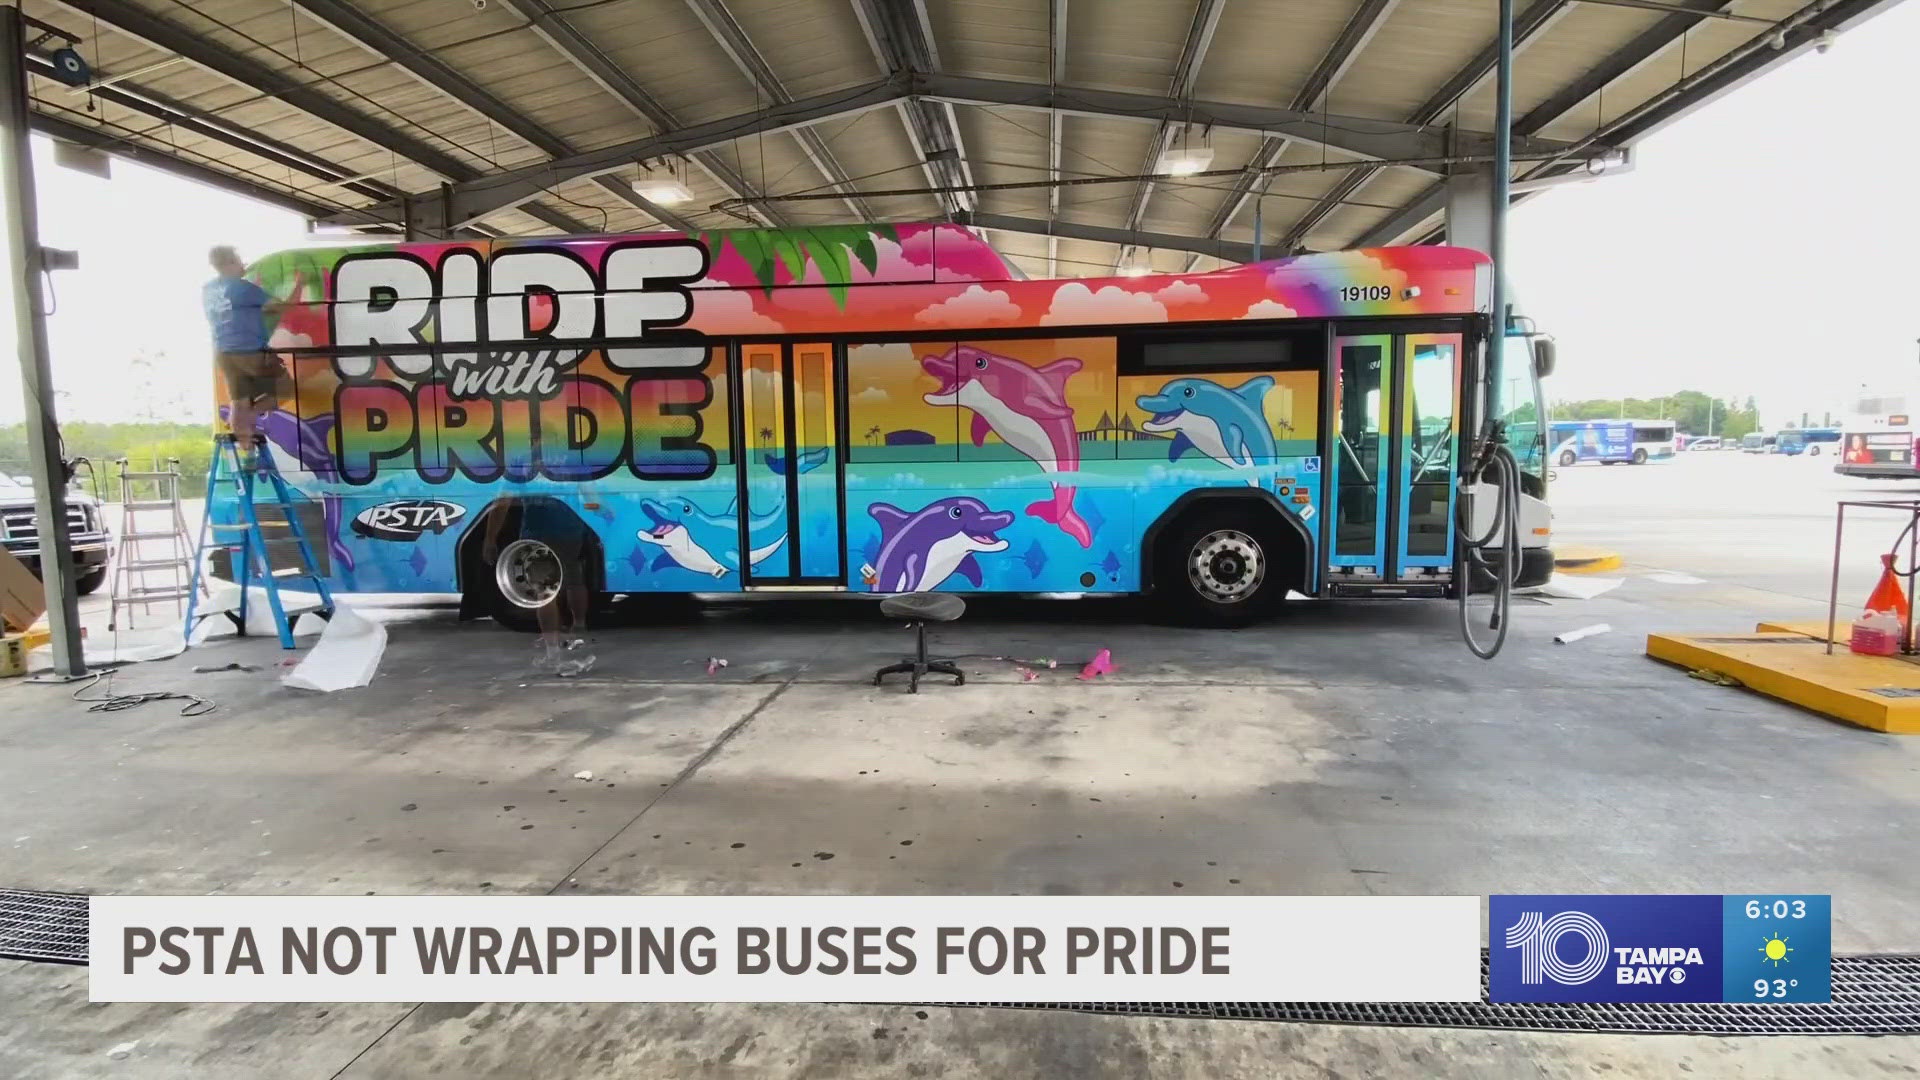 It's not just Pride that is impacted — all wrapped bus displays for events like MLK Day, Veteran's Day and others are on pause.